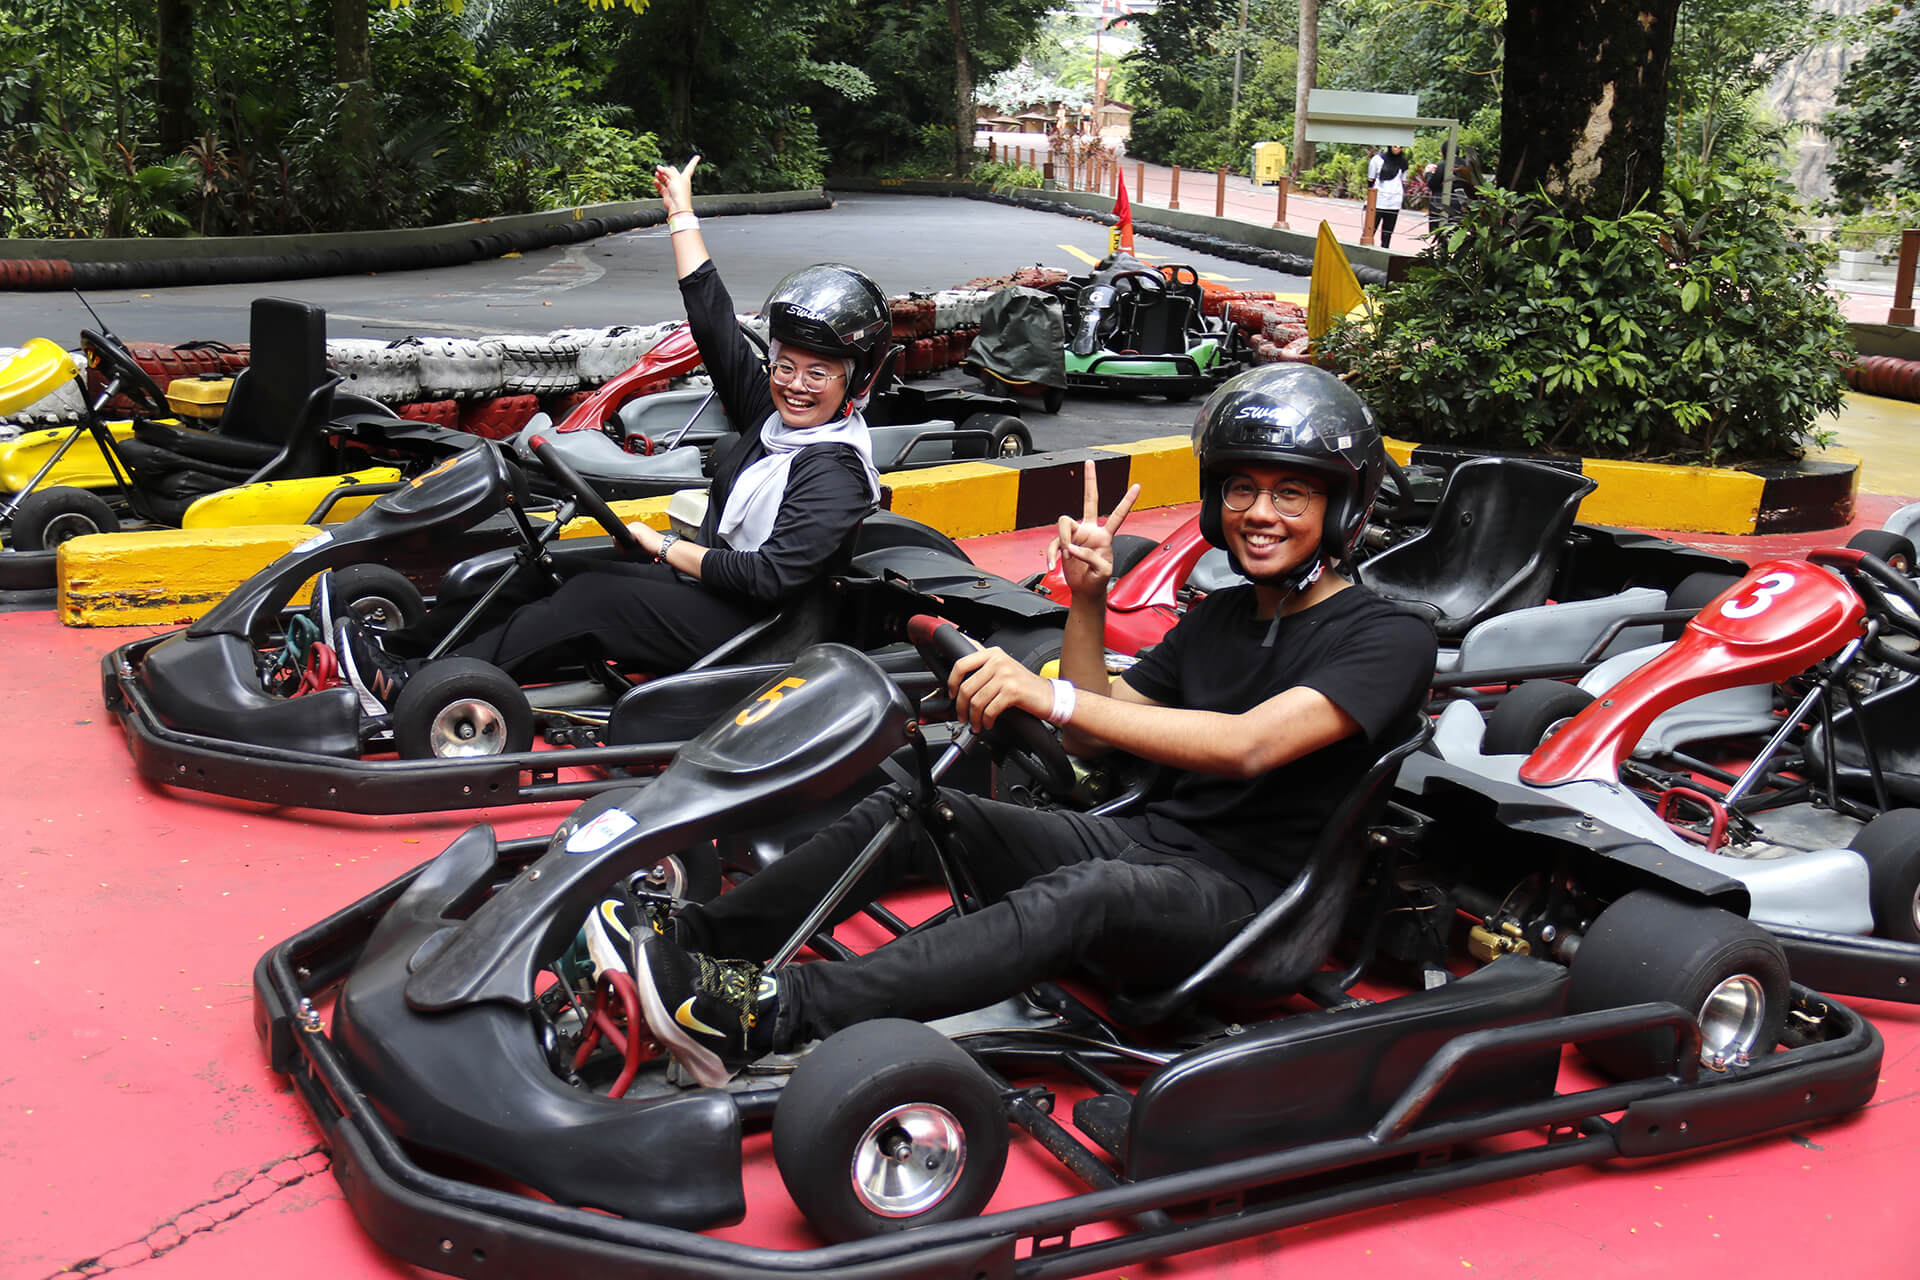 Set off on your own Marvel-esque journey with Go Karts at X Park, Sunway Lagoon